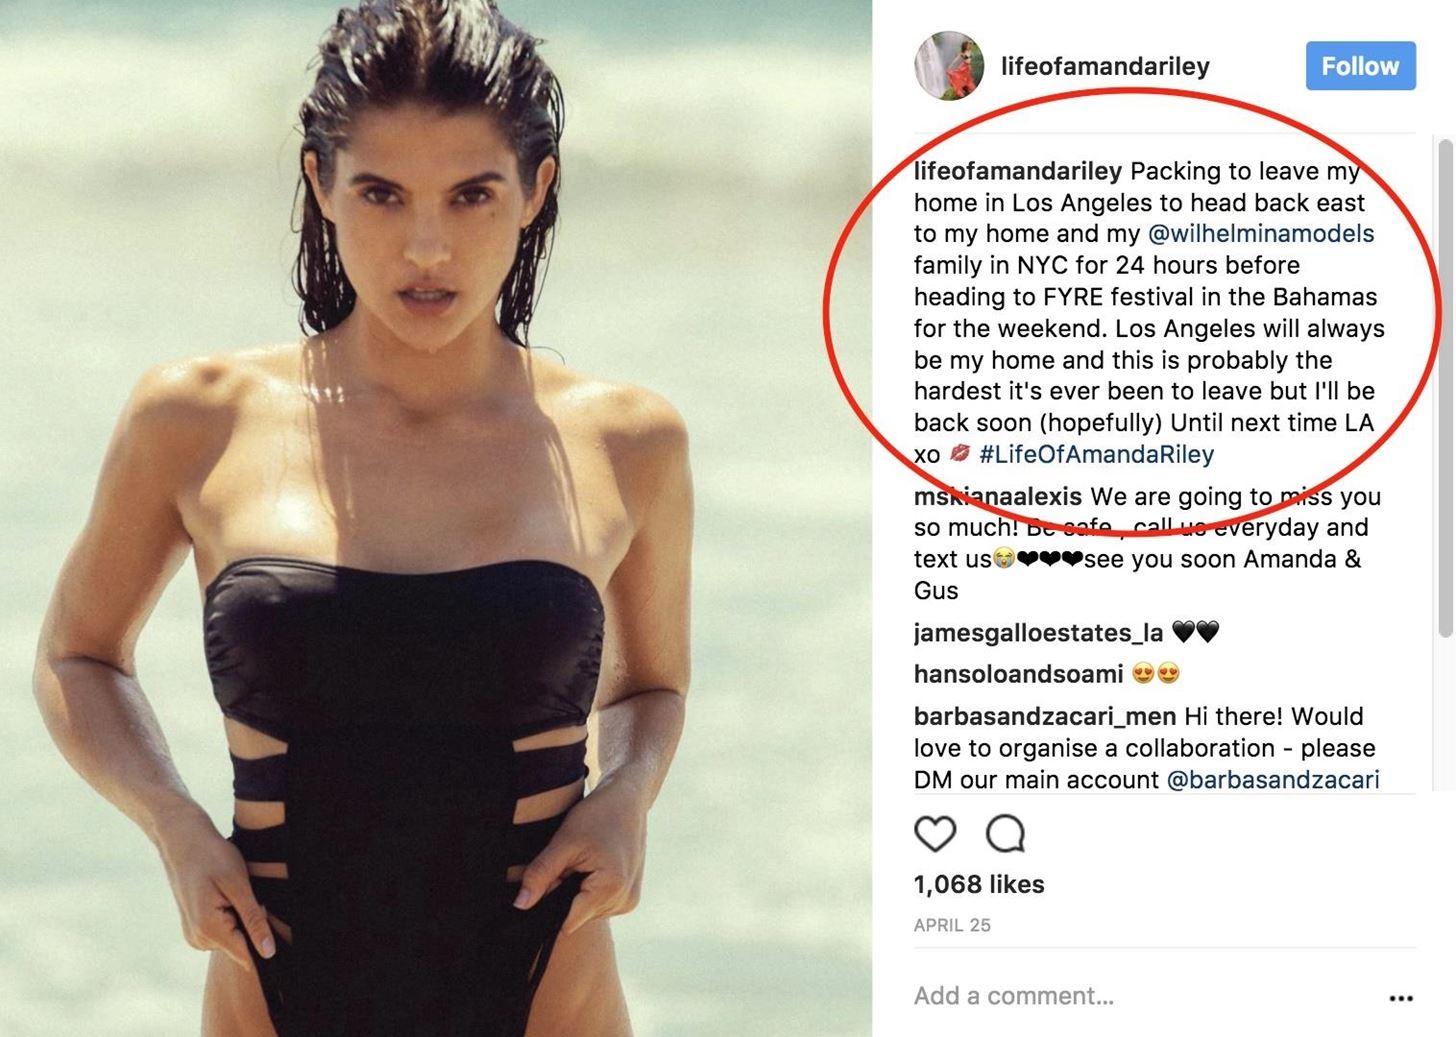 Fyre Starters: Meet the 15 Stars Whose (Undisclosed) #Spon Brought the FTC's Wrath on Instagram